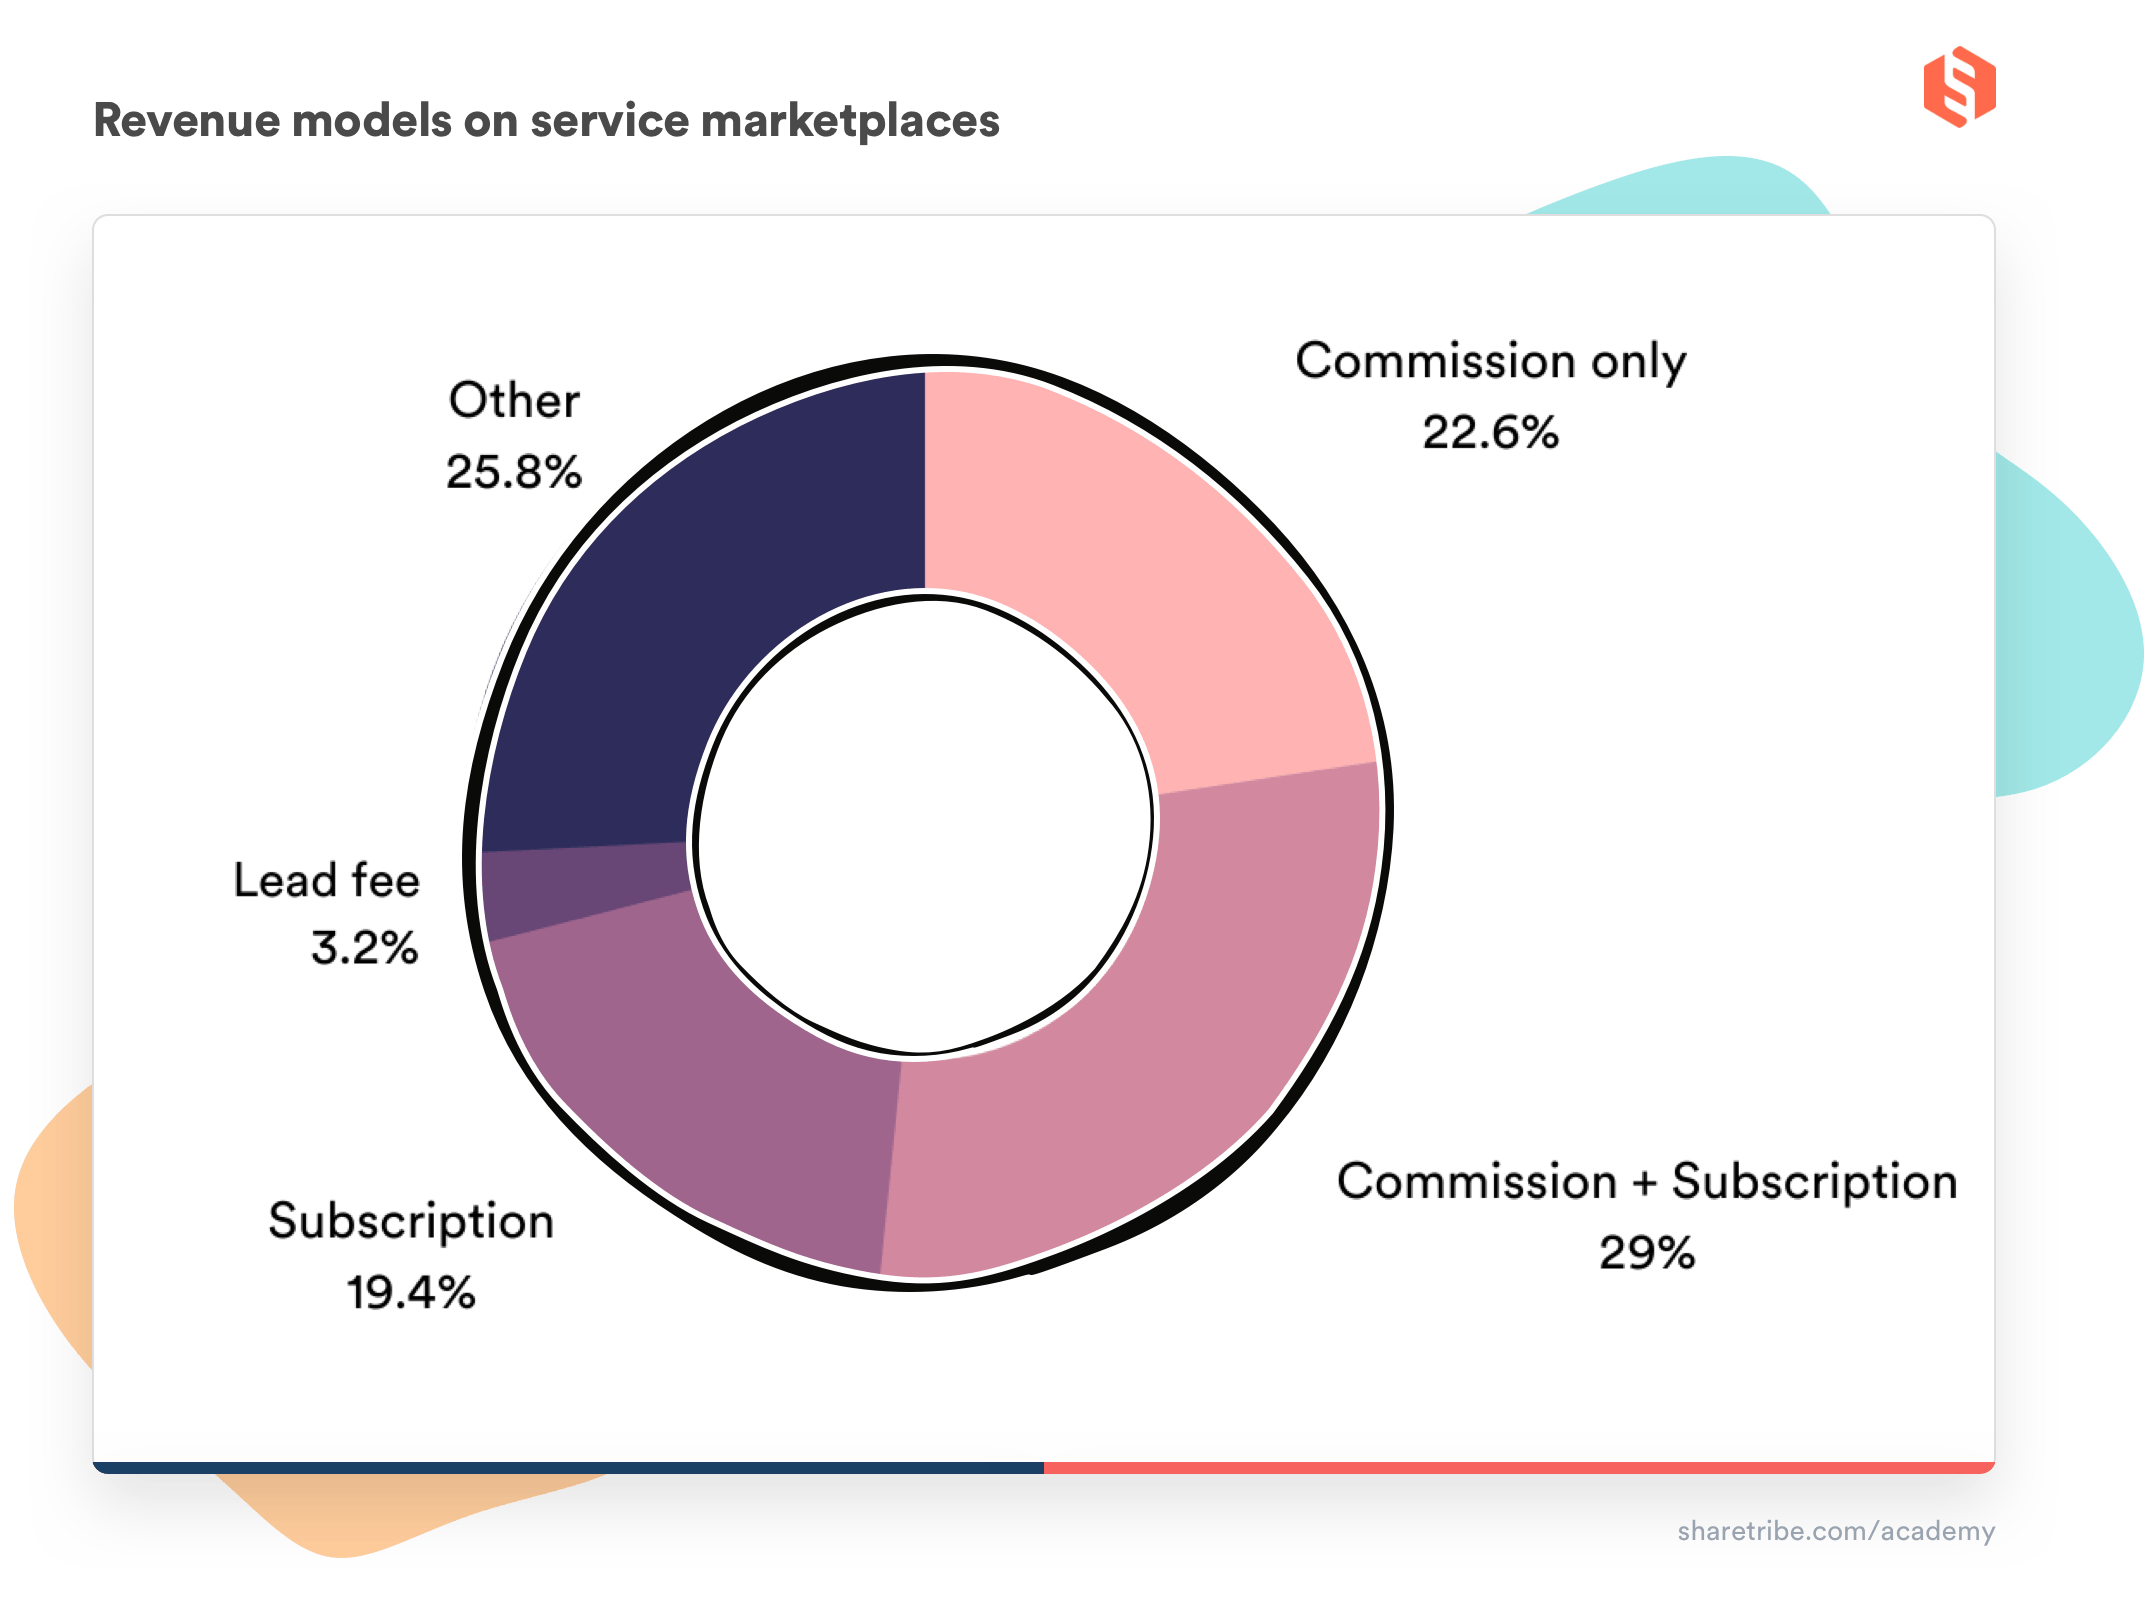 A pie chart illustrating business model use on service marketplaces among the top 100 marketplaces of 2022. 29% use commission + subscription, 25.8% use "Other", 22.6% use commission only, 19.4% use subscription only, and 3.2% use lead fees.